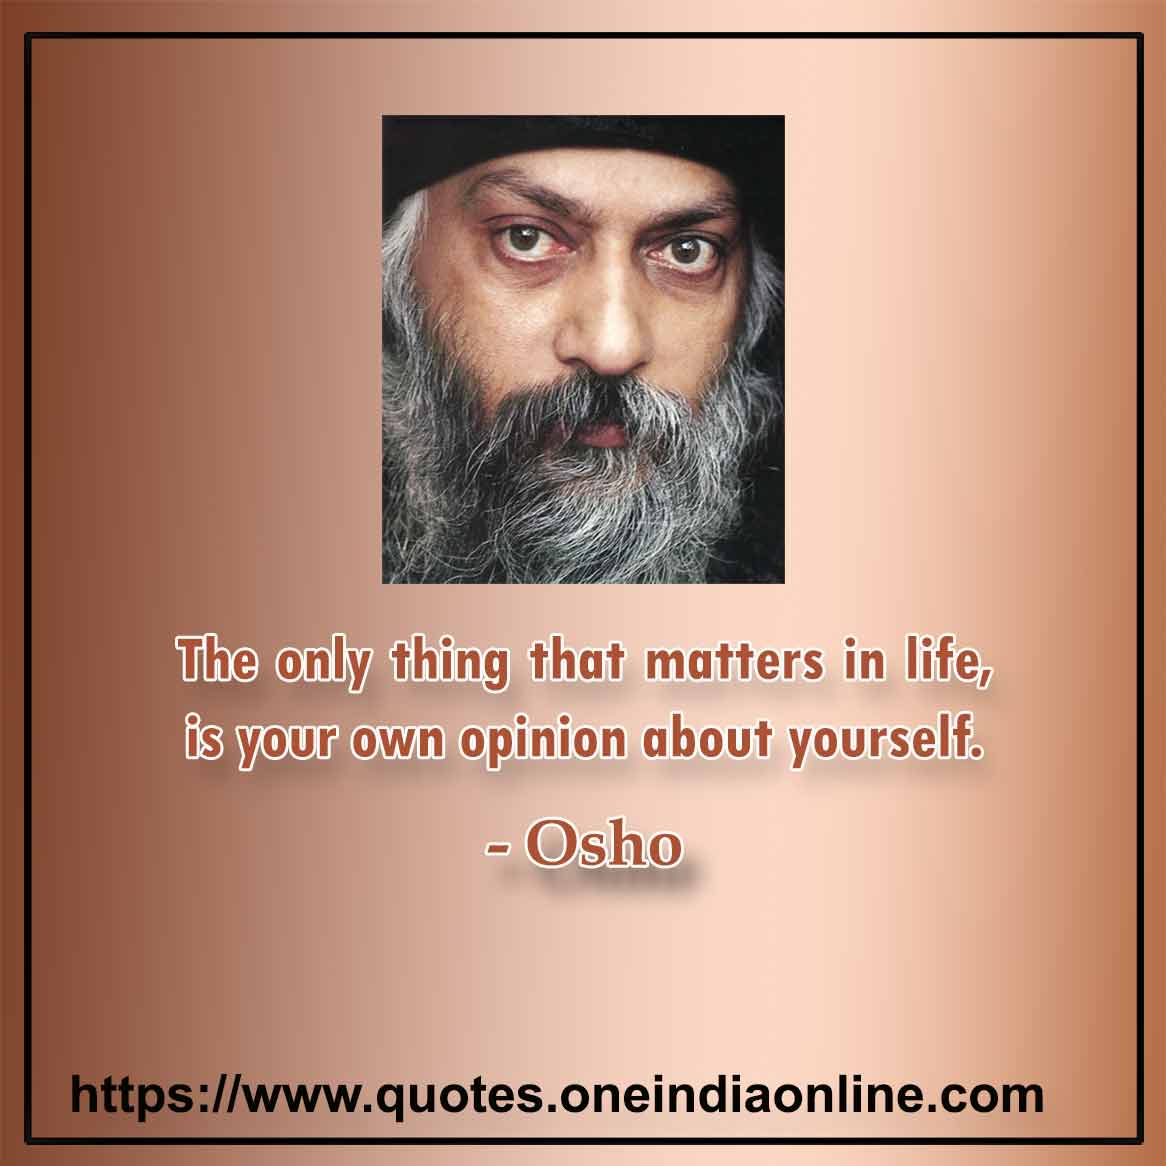 quotes by osho on life